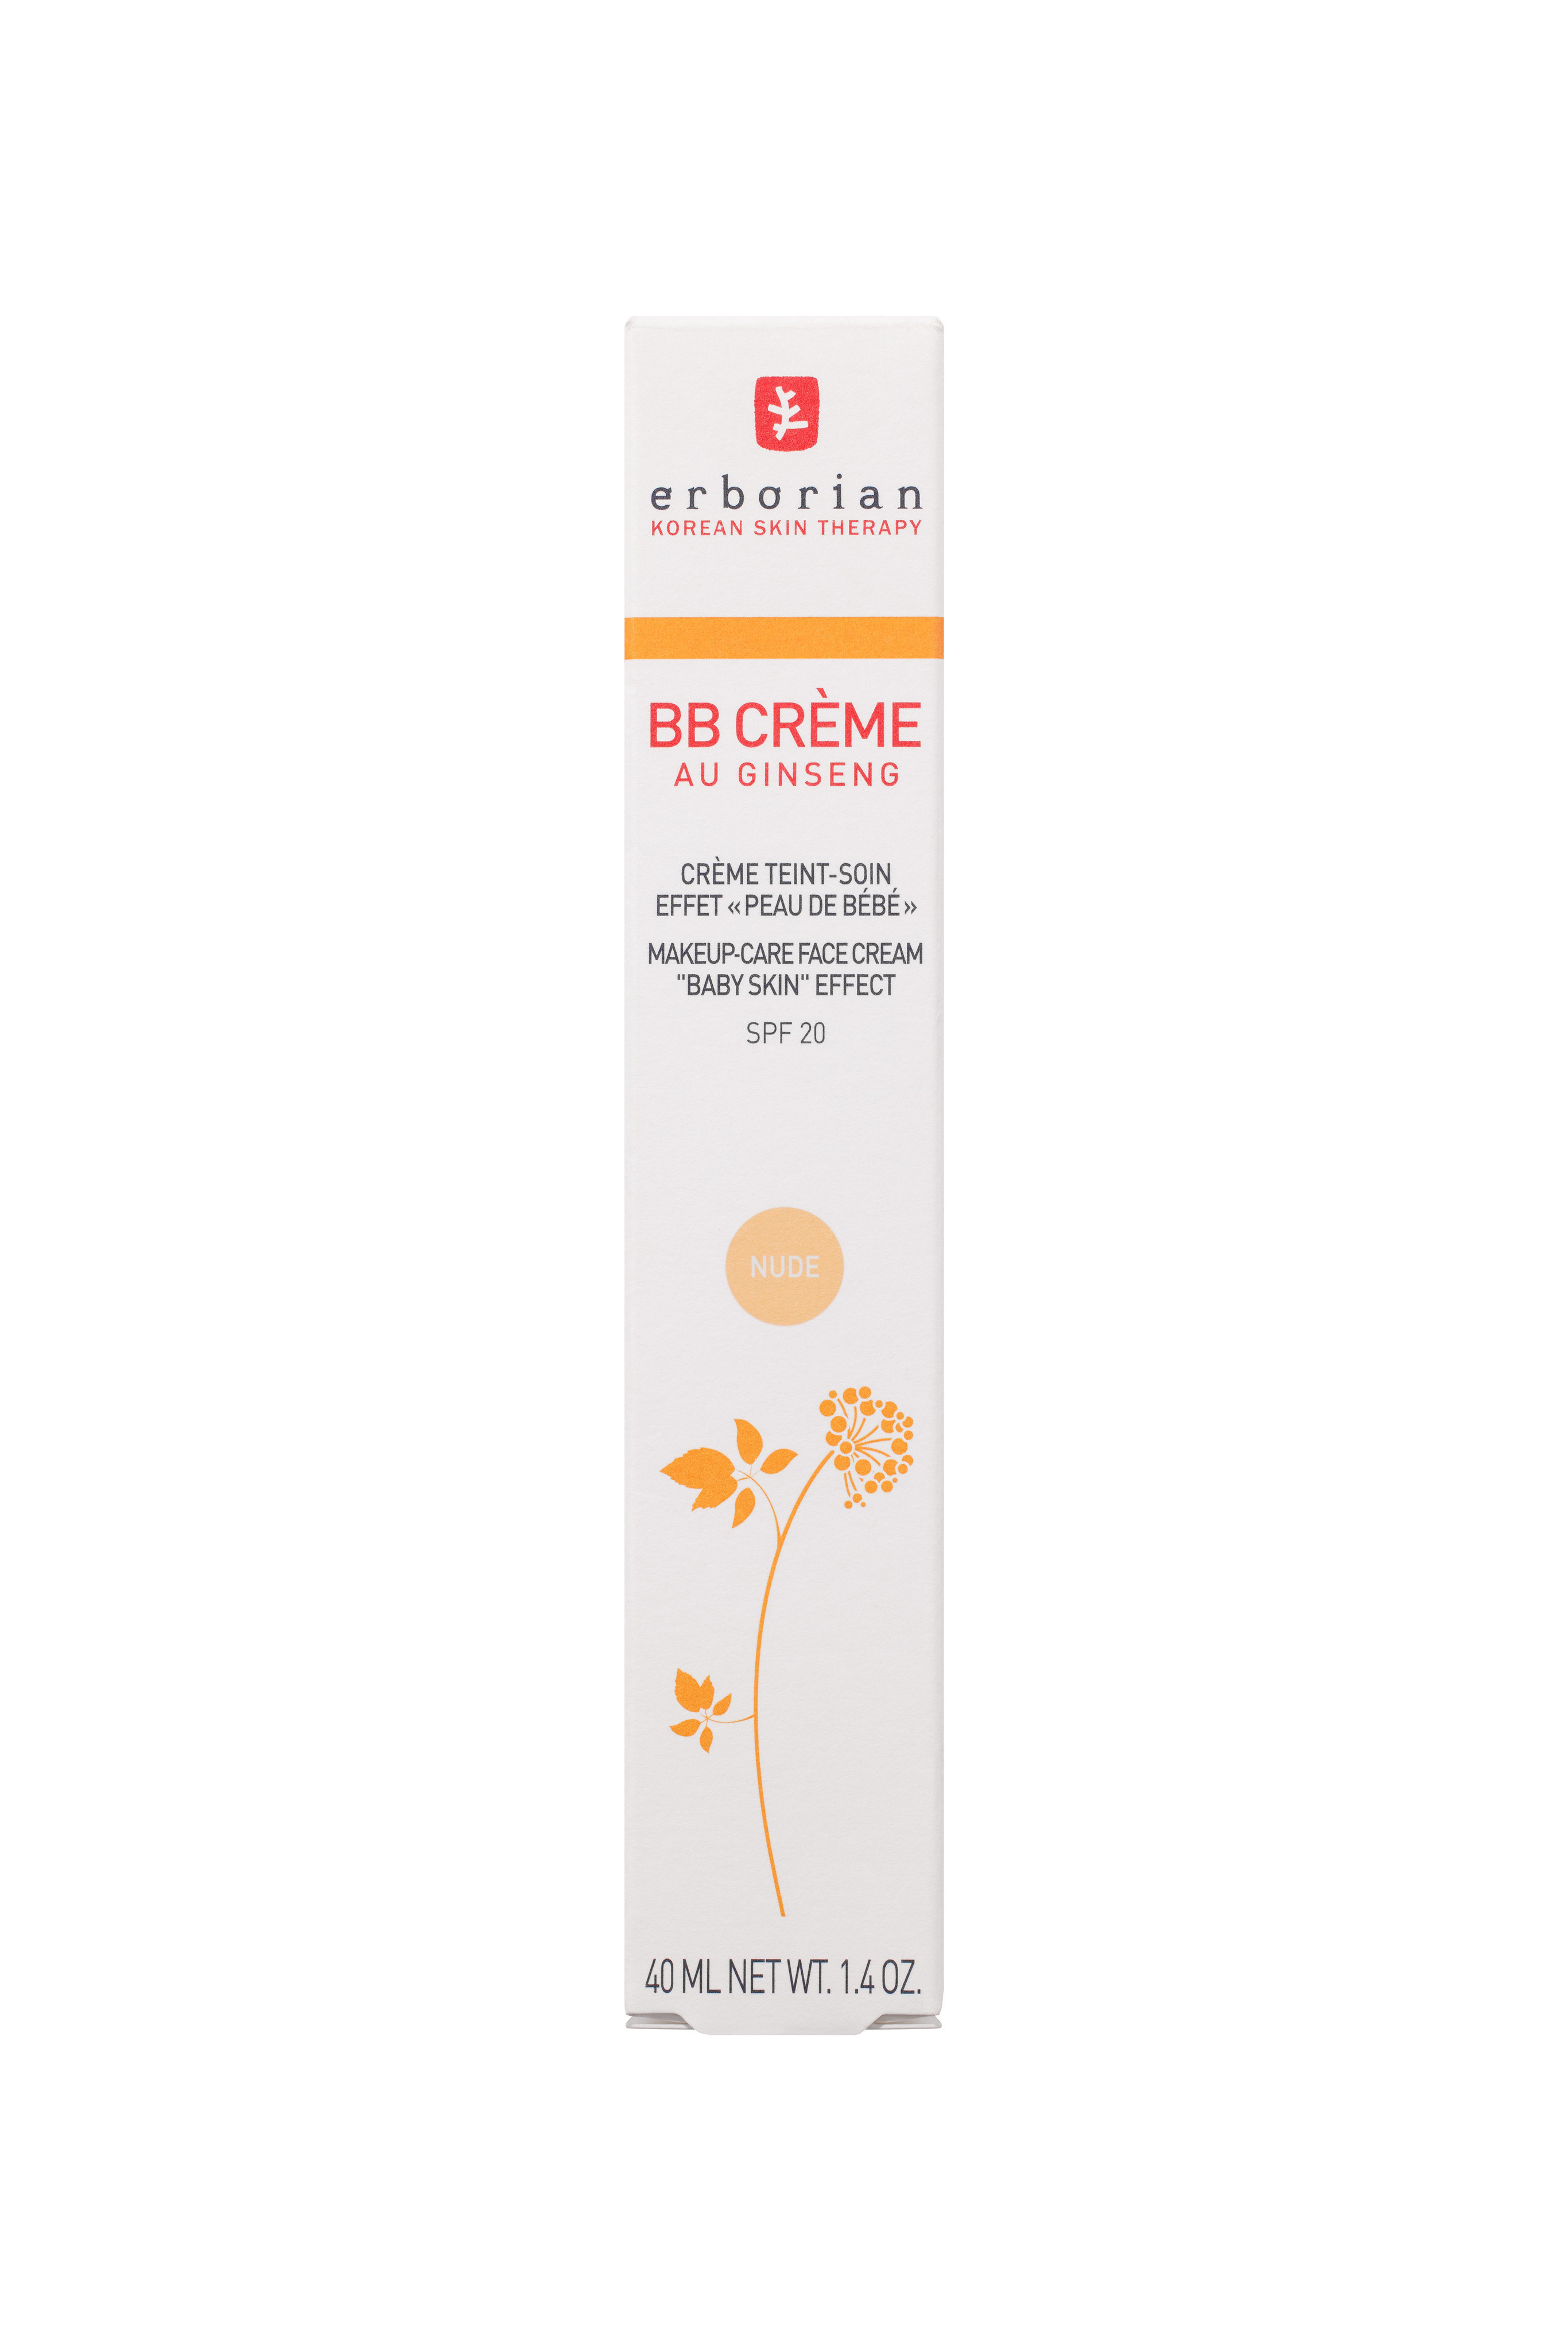 Erborian BB Crème Nude 40ml - Makeup e trattamento 2 in 1, Nude, large image number 1